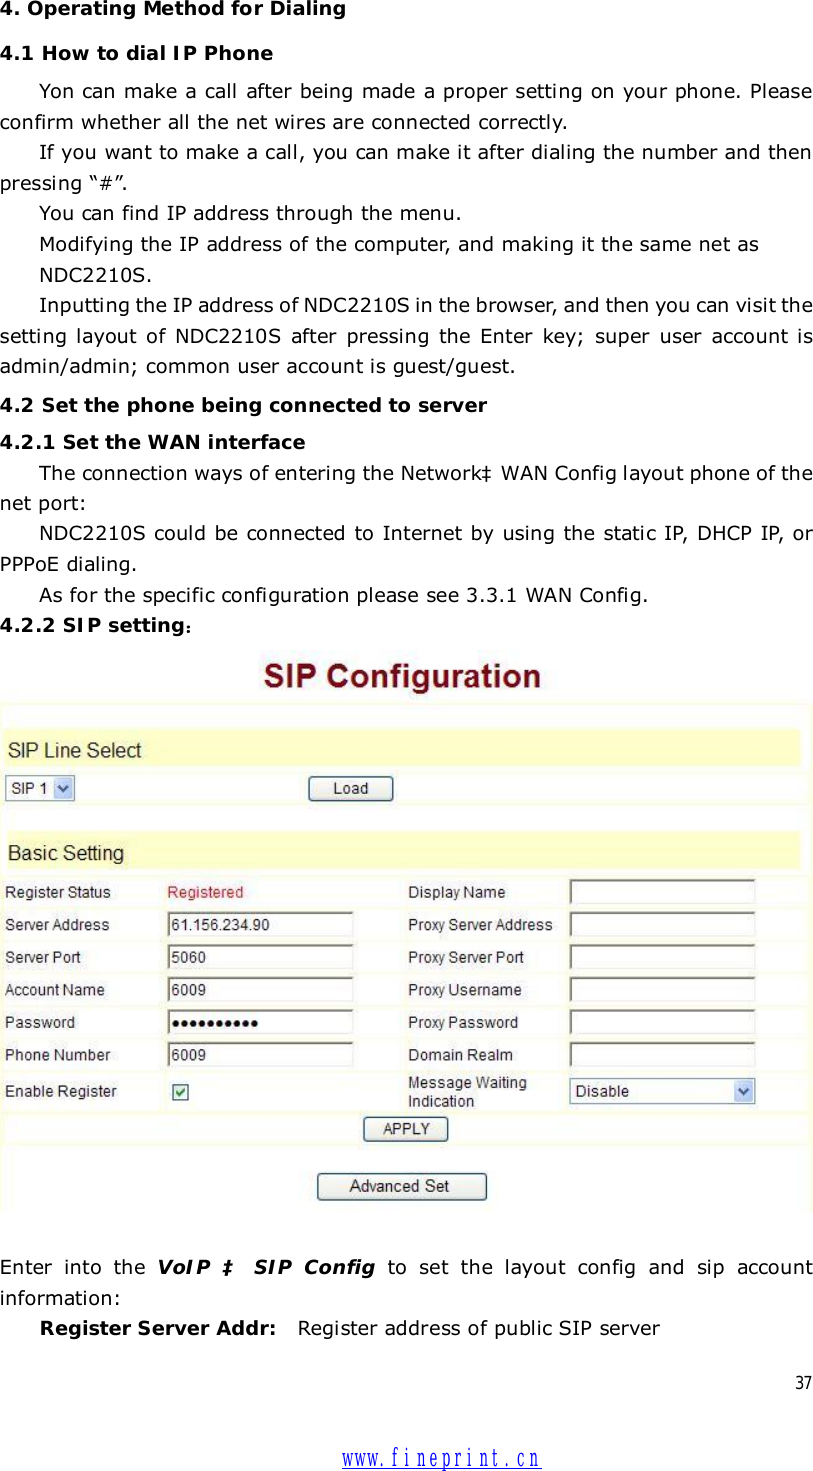  37 4. Operating Method for Dialing 4.1 How to dial IP Phone Yon can make a call after being made a proper setting on your phone. Please confirm whether all the net wires are connected correctly. If you want to make a call, you can make it after dialing the number and then pressing “#”. You can find IP address through the menu. Modifying the IP address of the computer, and making it the same net as  NDC2210S. Inputting the IP address of NDC2210S in the browser, and then you can visit the setting layout of NDC2210S after pressing the Enter key; super user account is admin/admin; common user account is guest/guest. 4.2 Set the phone being connected to server 4.2.1 Set the WAN interface The connection ways of entering the NetworkàWAN Config layout phone of the net port:  NDC2210S could be connected to Internet by using the static IP, DHCP IP, or PPPoE dialing.  As for the specific configuration please see 3.3.1 WAN Config. 4.2.2 SIP setting：   Enter into the  VoIP  à SIP Config to set the layout config and sip account information:  Register Server Addr:  Register address of public SIP server  www.fineprint.cn